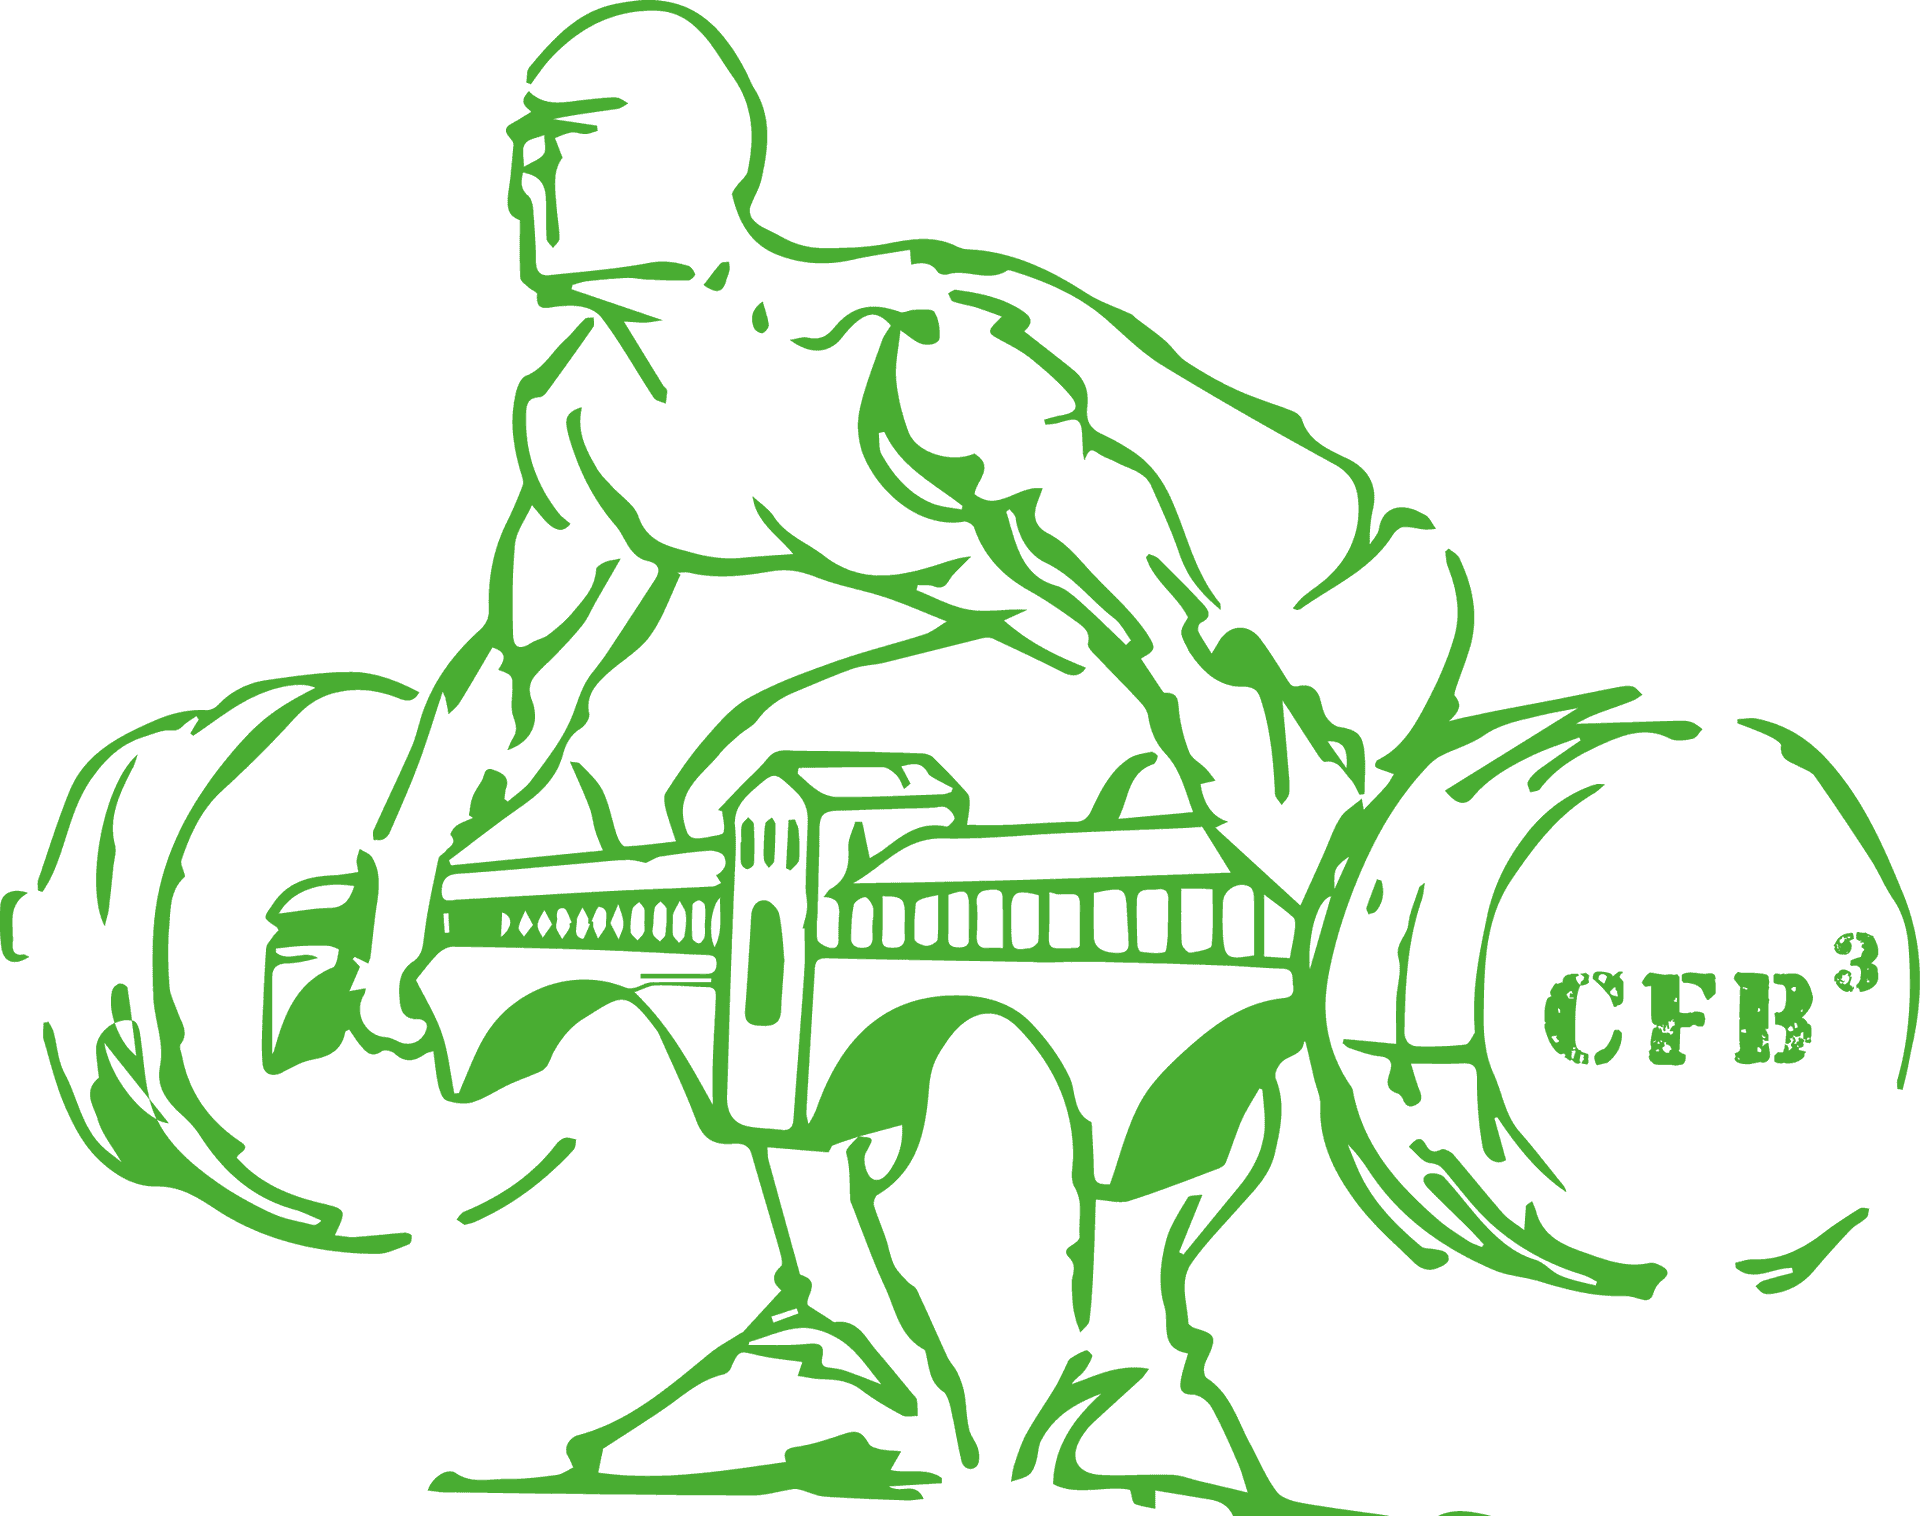 Weightlifter Deadlifting Barbell Silhouette PNG image